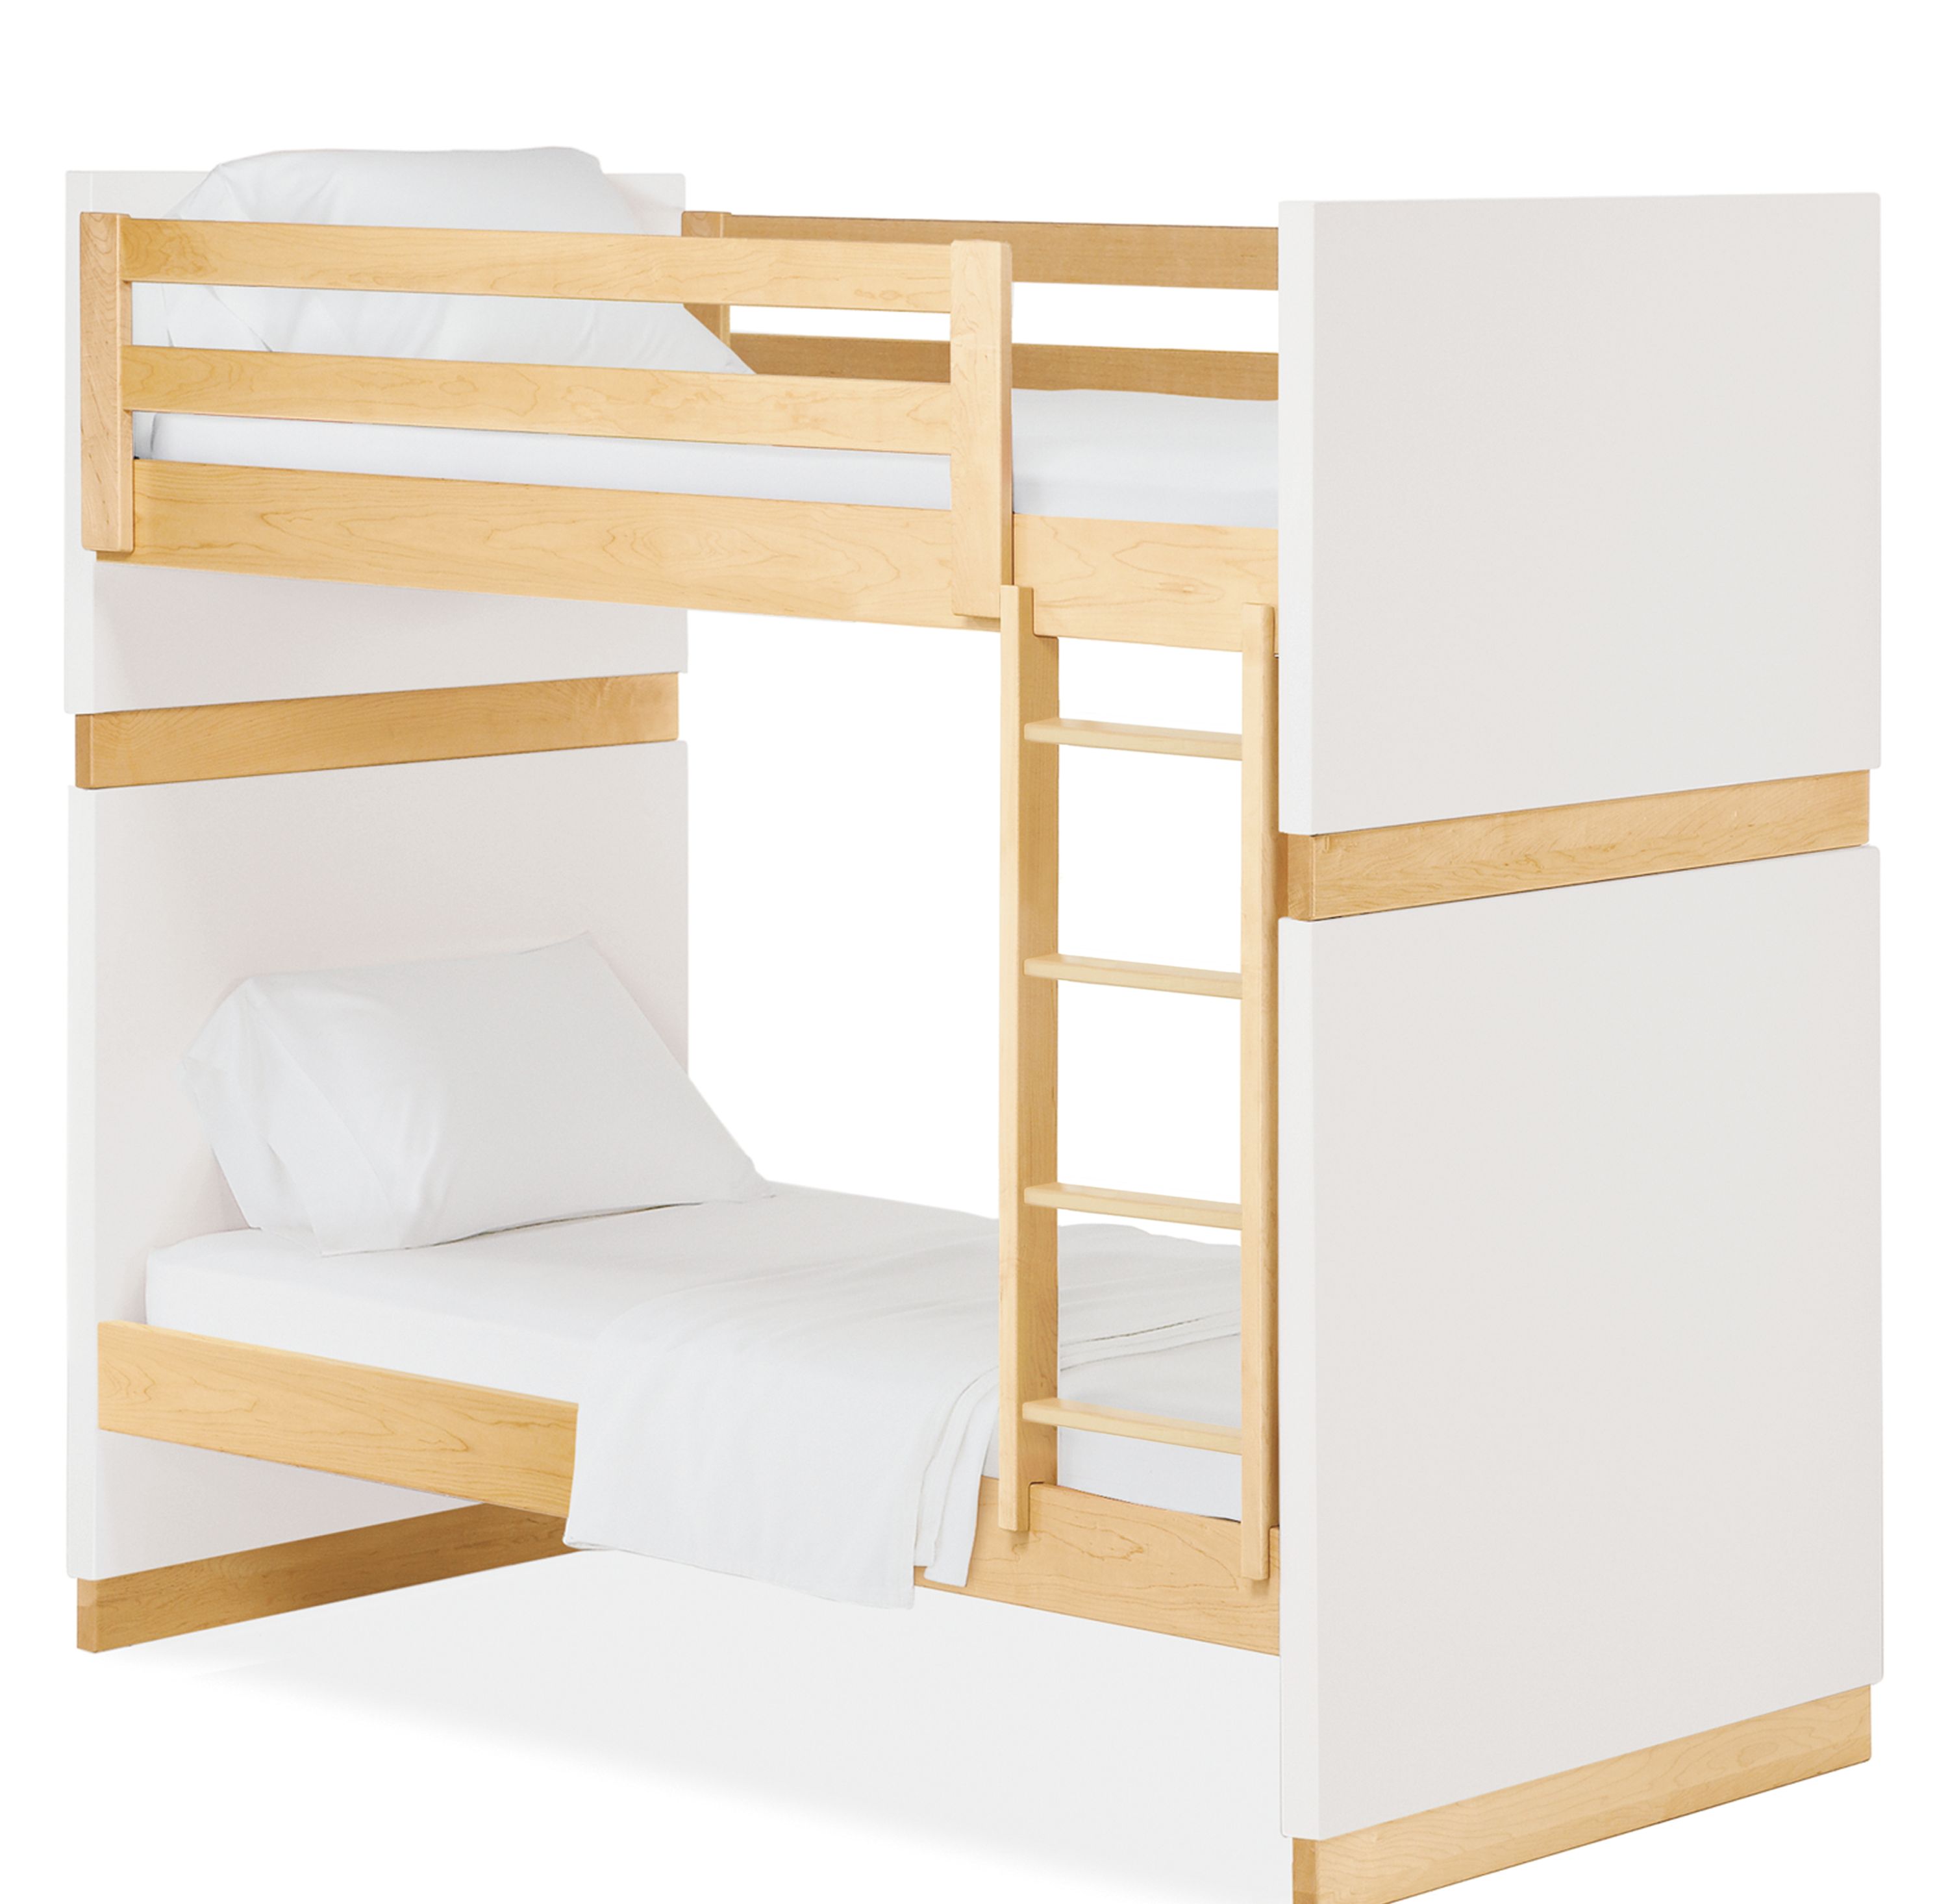 Moda Bunk Beds Twin Over, Modern Full Size Bunk Beds